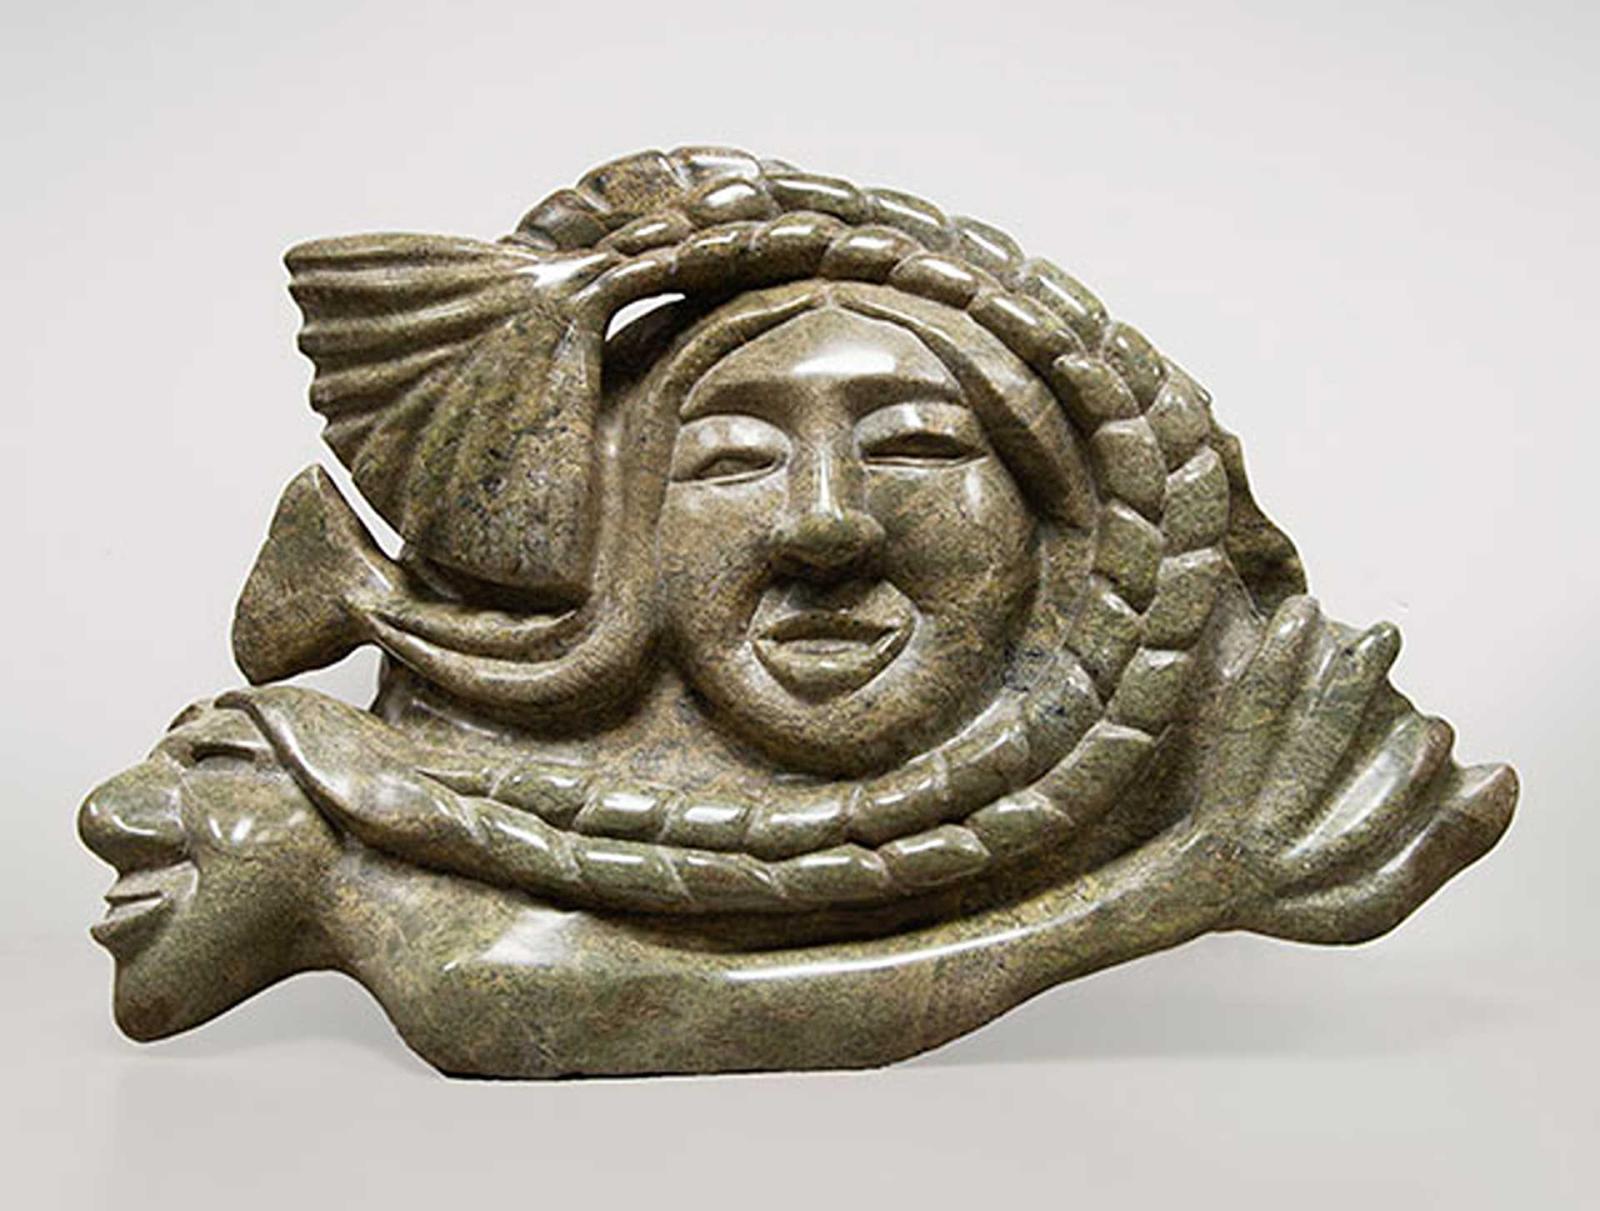 Green stone carving of a woman's face surrounded by a fish tail braid, supported by a prone figure of a man with a fish tail.